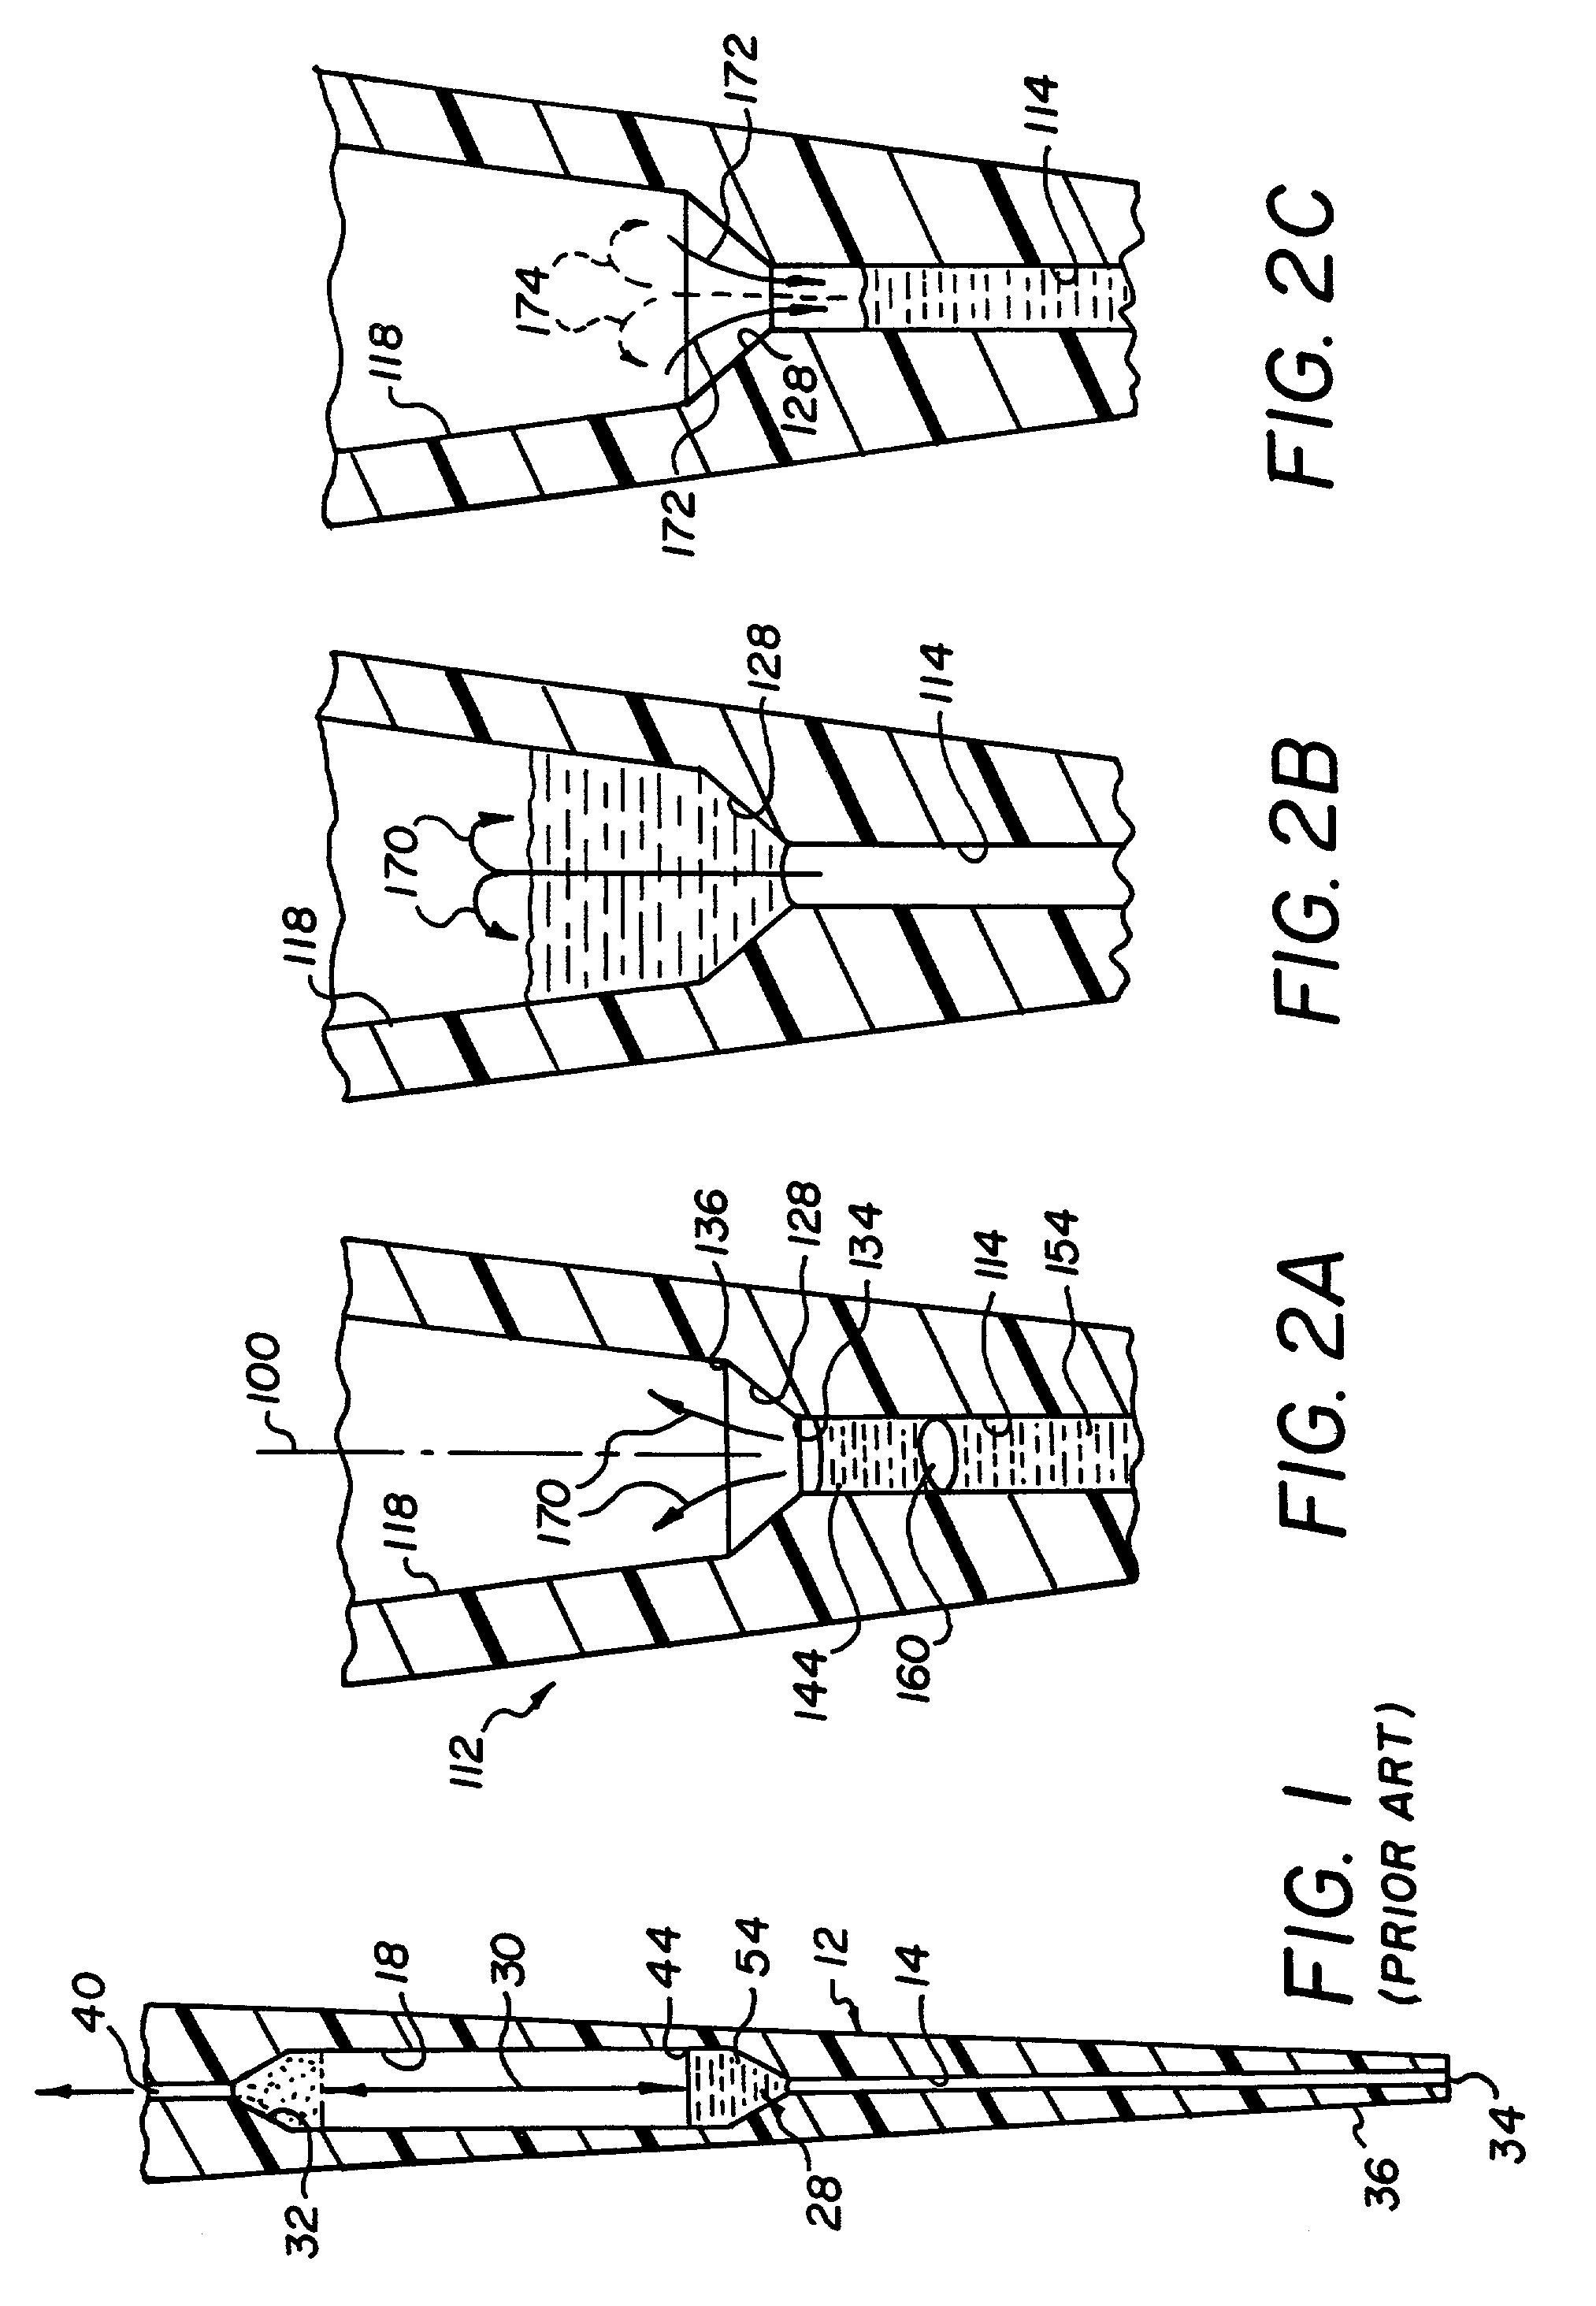 Aspirating and mixing of liquids within a probe tip